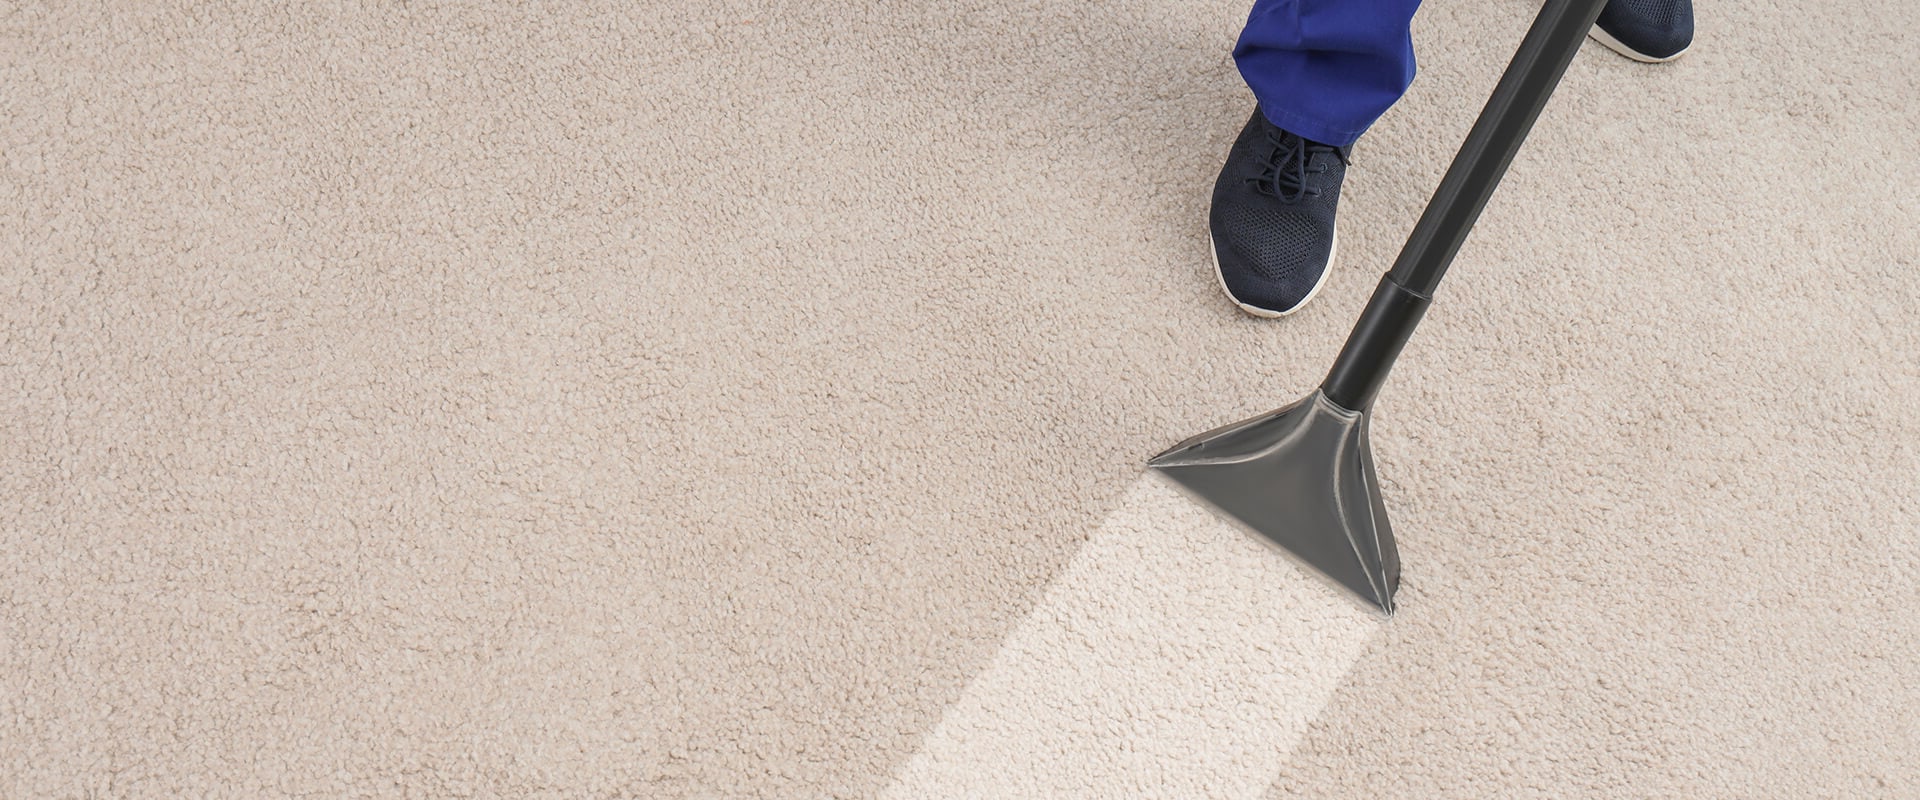 The Most Effective Way to Clean Badly Soiled Carpets